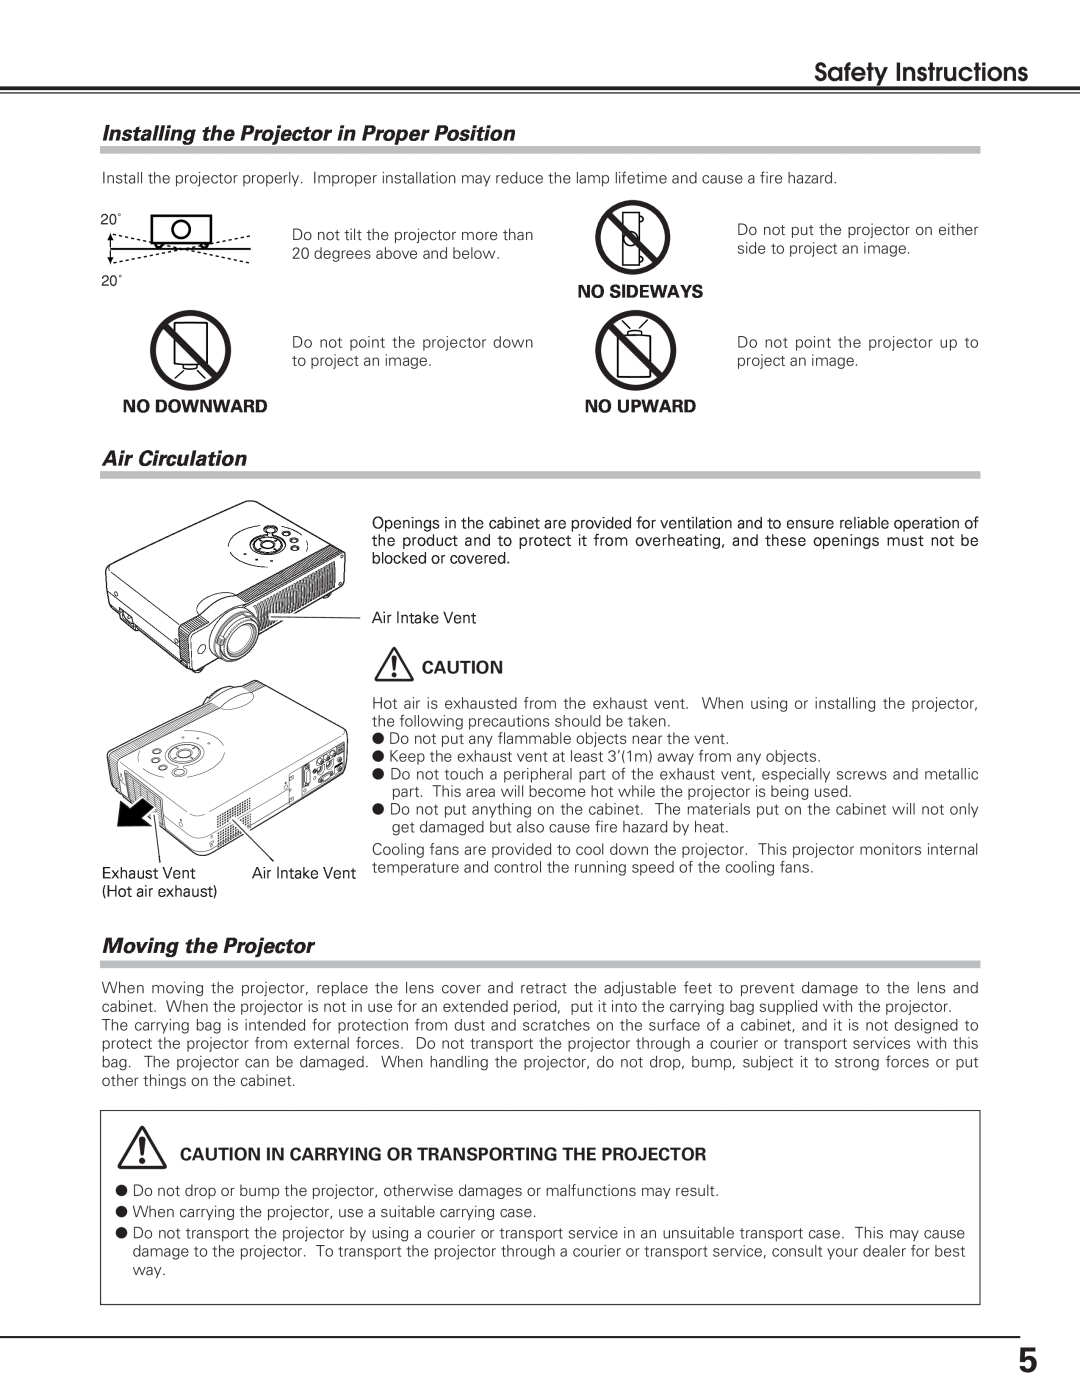 Christie Digital Systems 38-VIV208-01 Safety Instructions, Installing the Projector in Proper Position, Air Circulation 